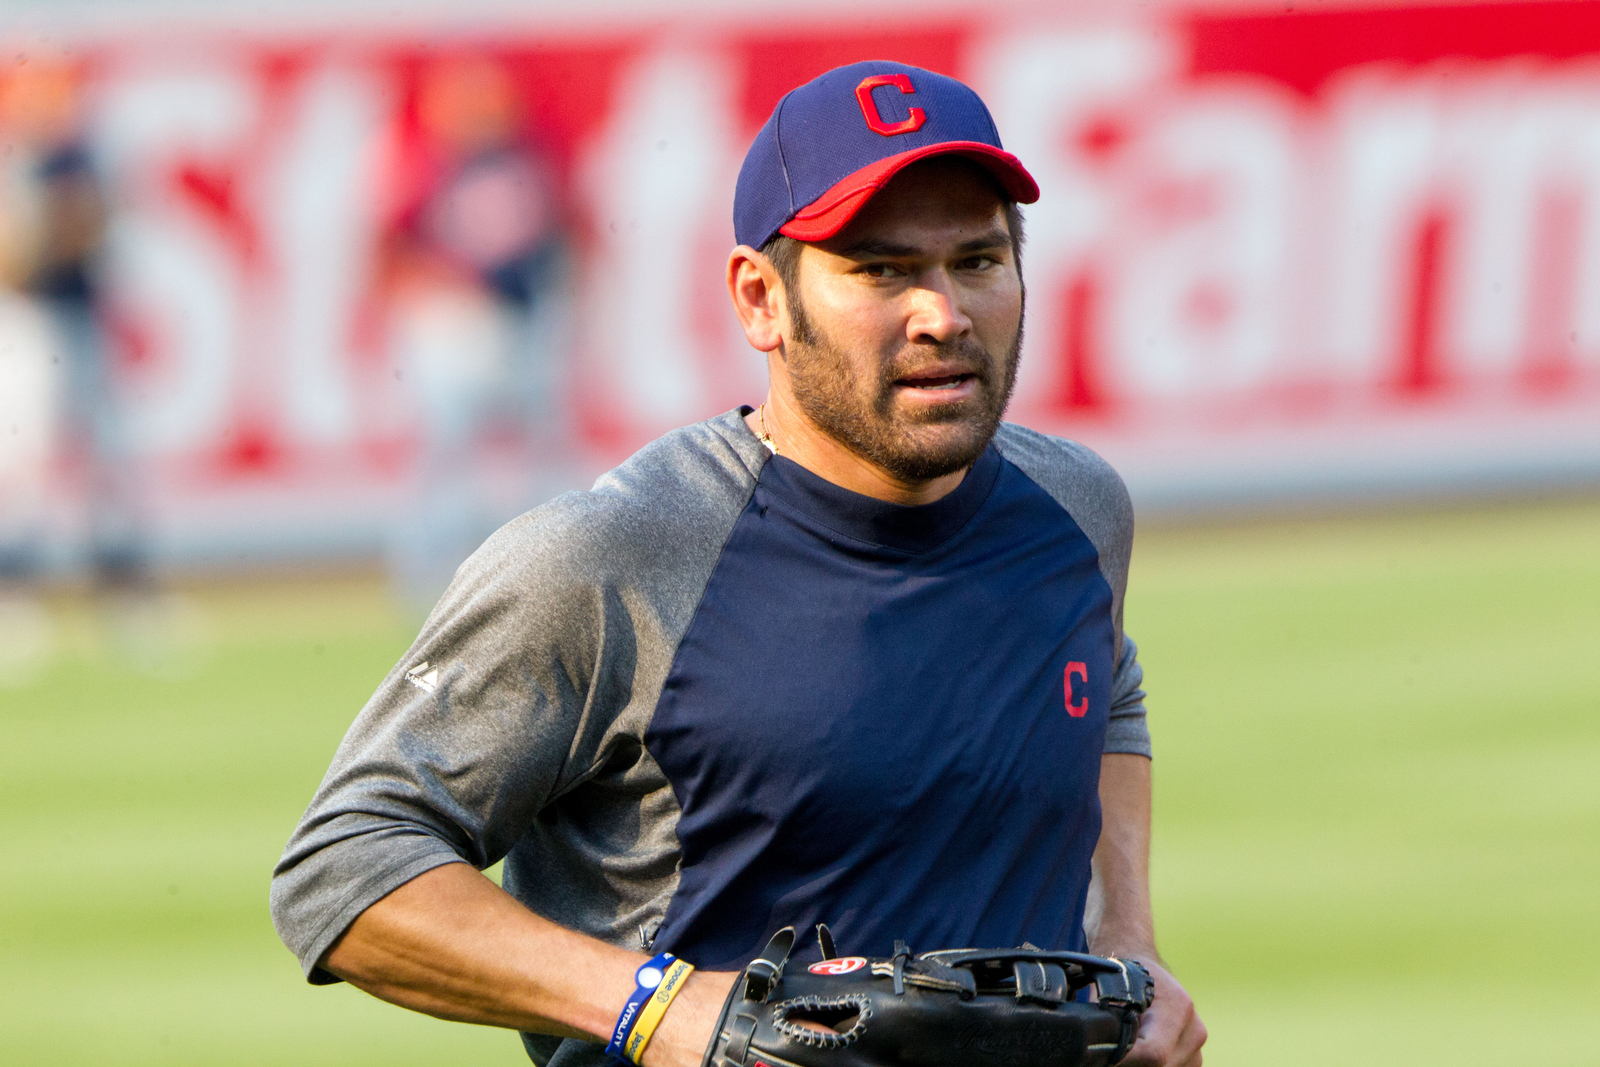 Johnny Damon still wants to play, believes he can out-hit half of baseball